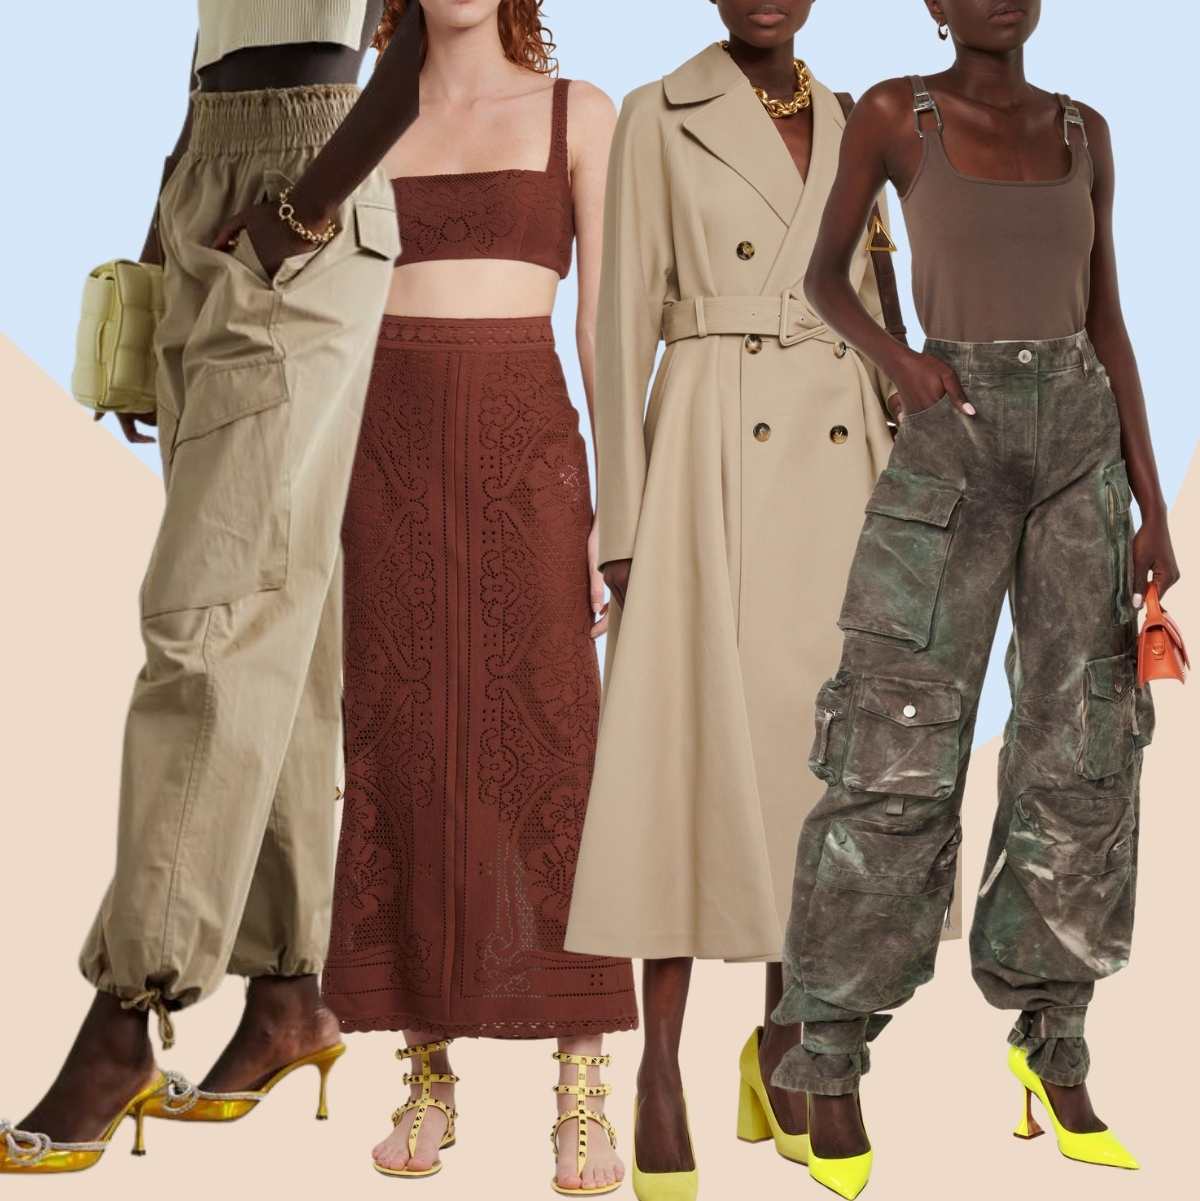 Collage of 4 women wearing different yellow shoes outfits with earth tones.